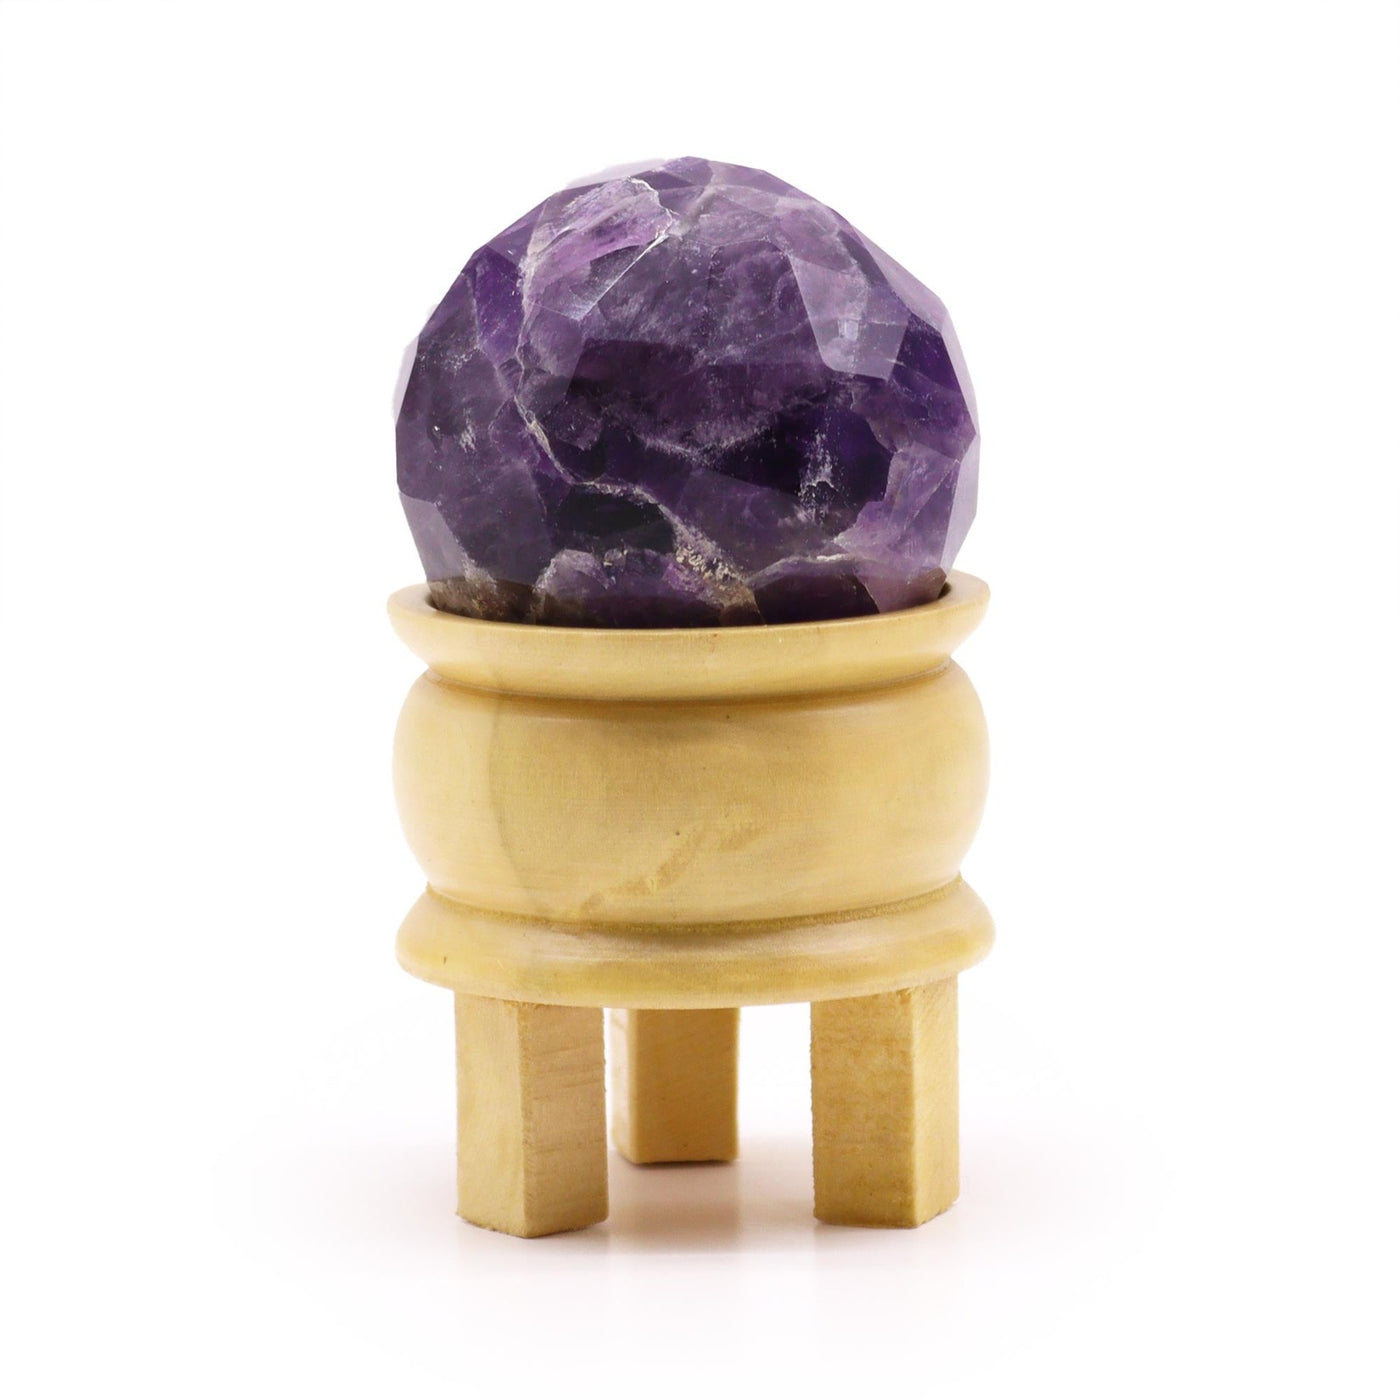 Healing Amethyst Gemstone Faceted Ball Ornament With Wooden Stand.